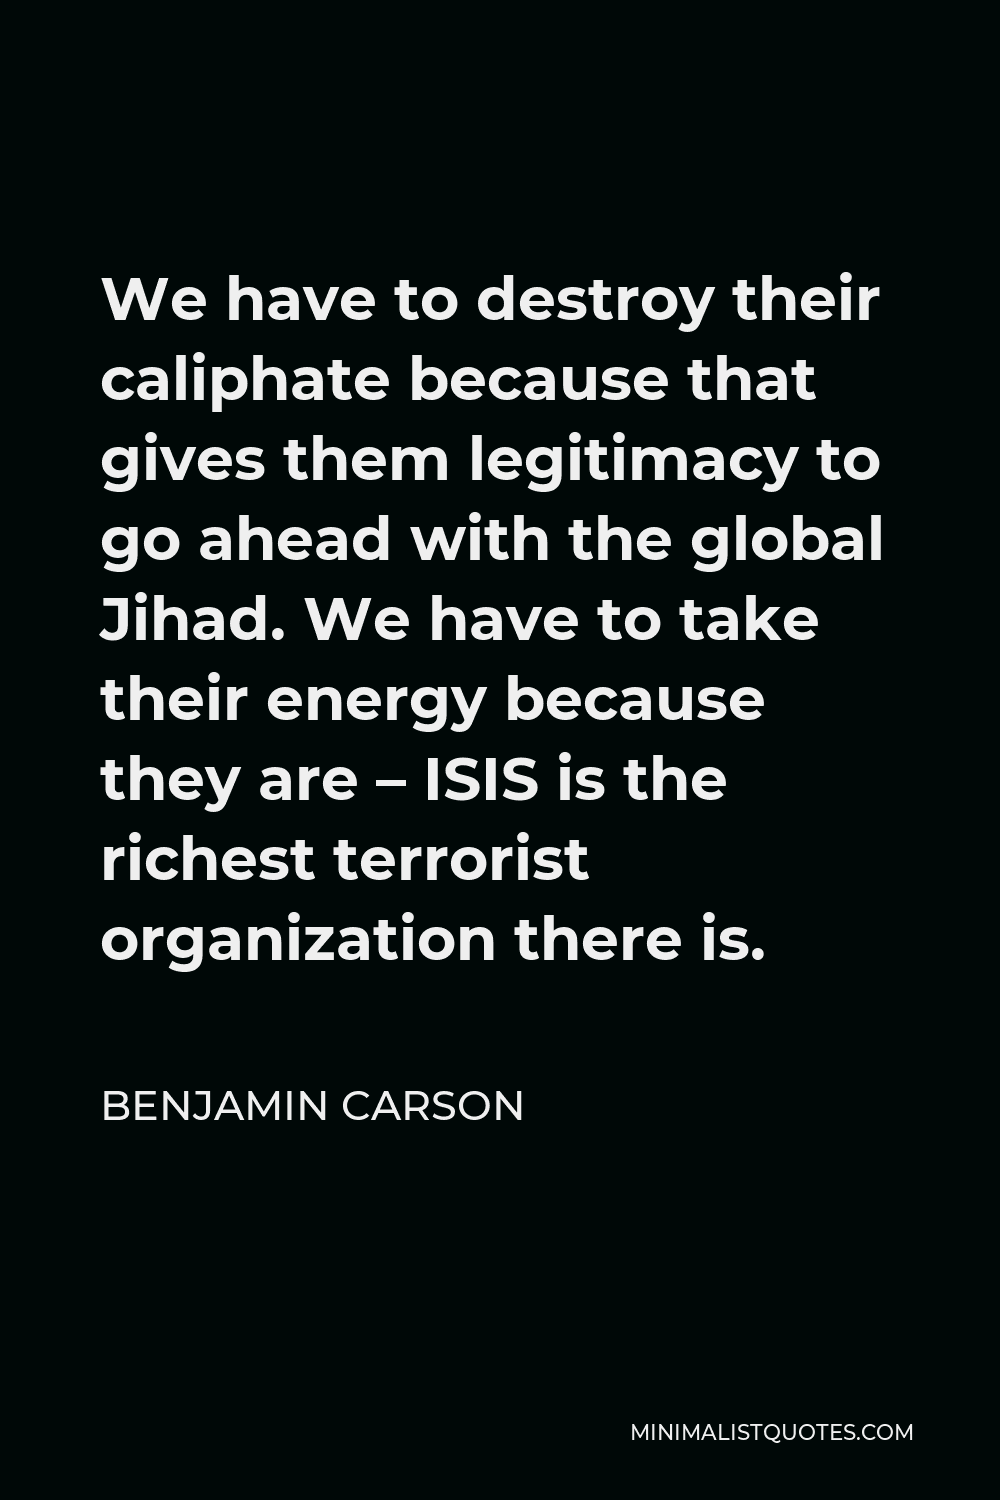 Benjamin Carson Quote - We have to destroy their caliphate because that gives them legitimacy to go ahead with the global Jihad. We have to take their energy because they are – ISIS is the richest terrorist organization there is.